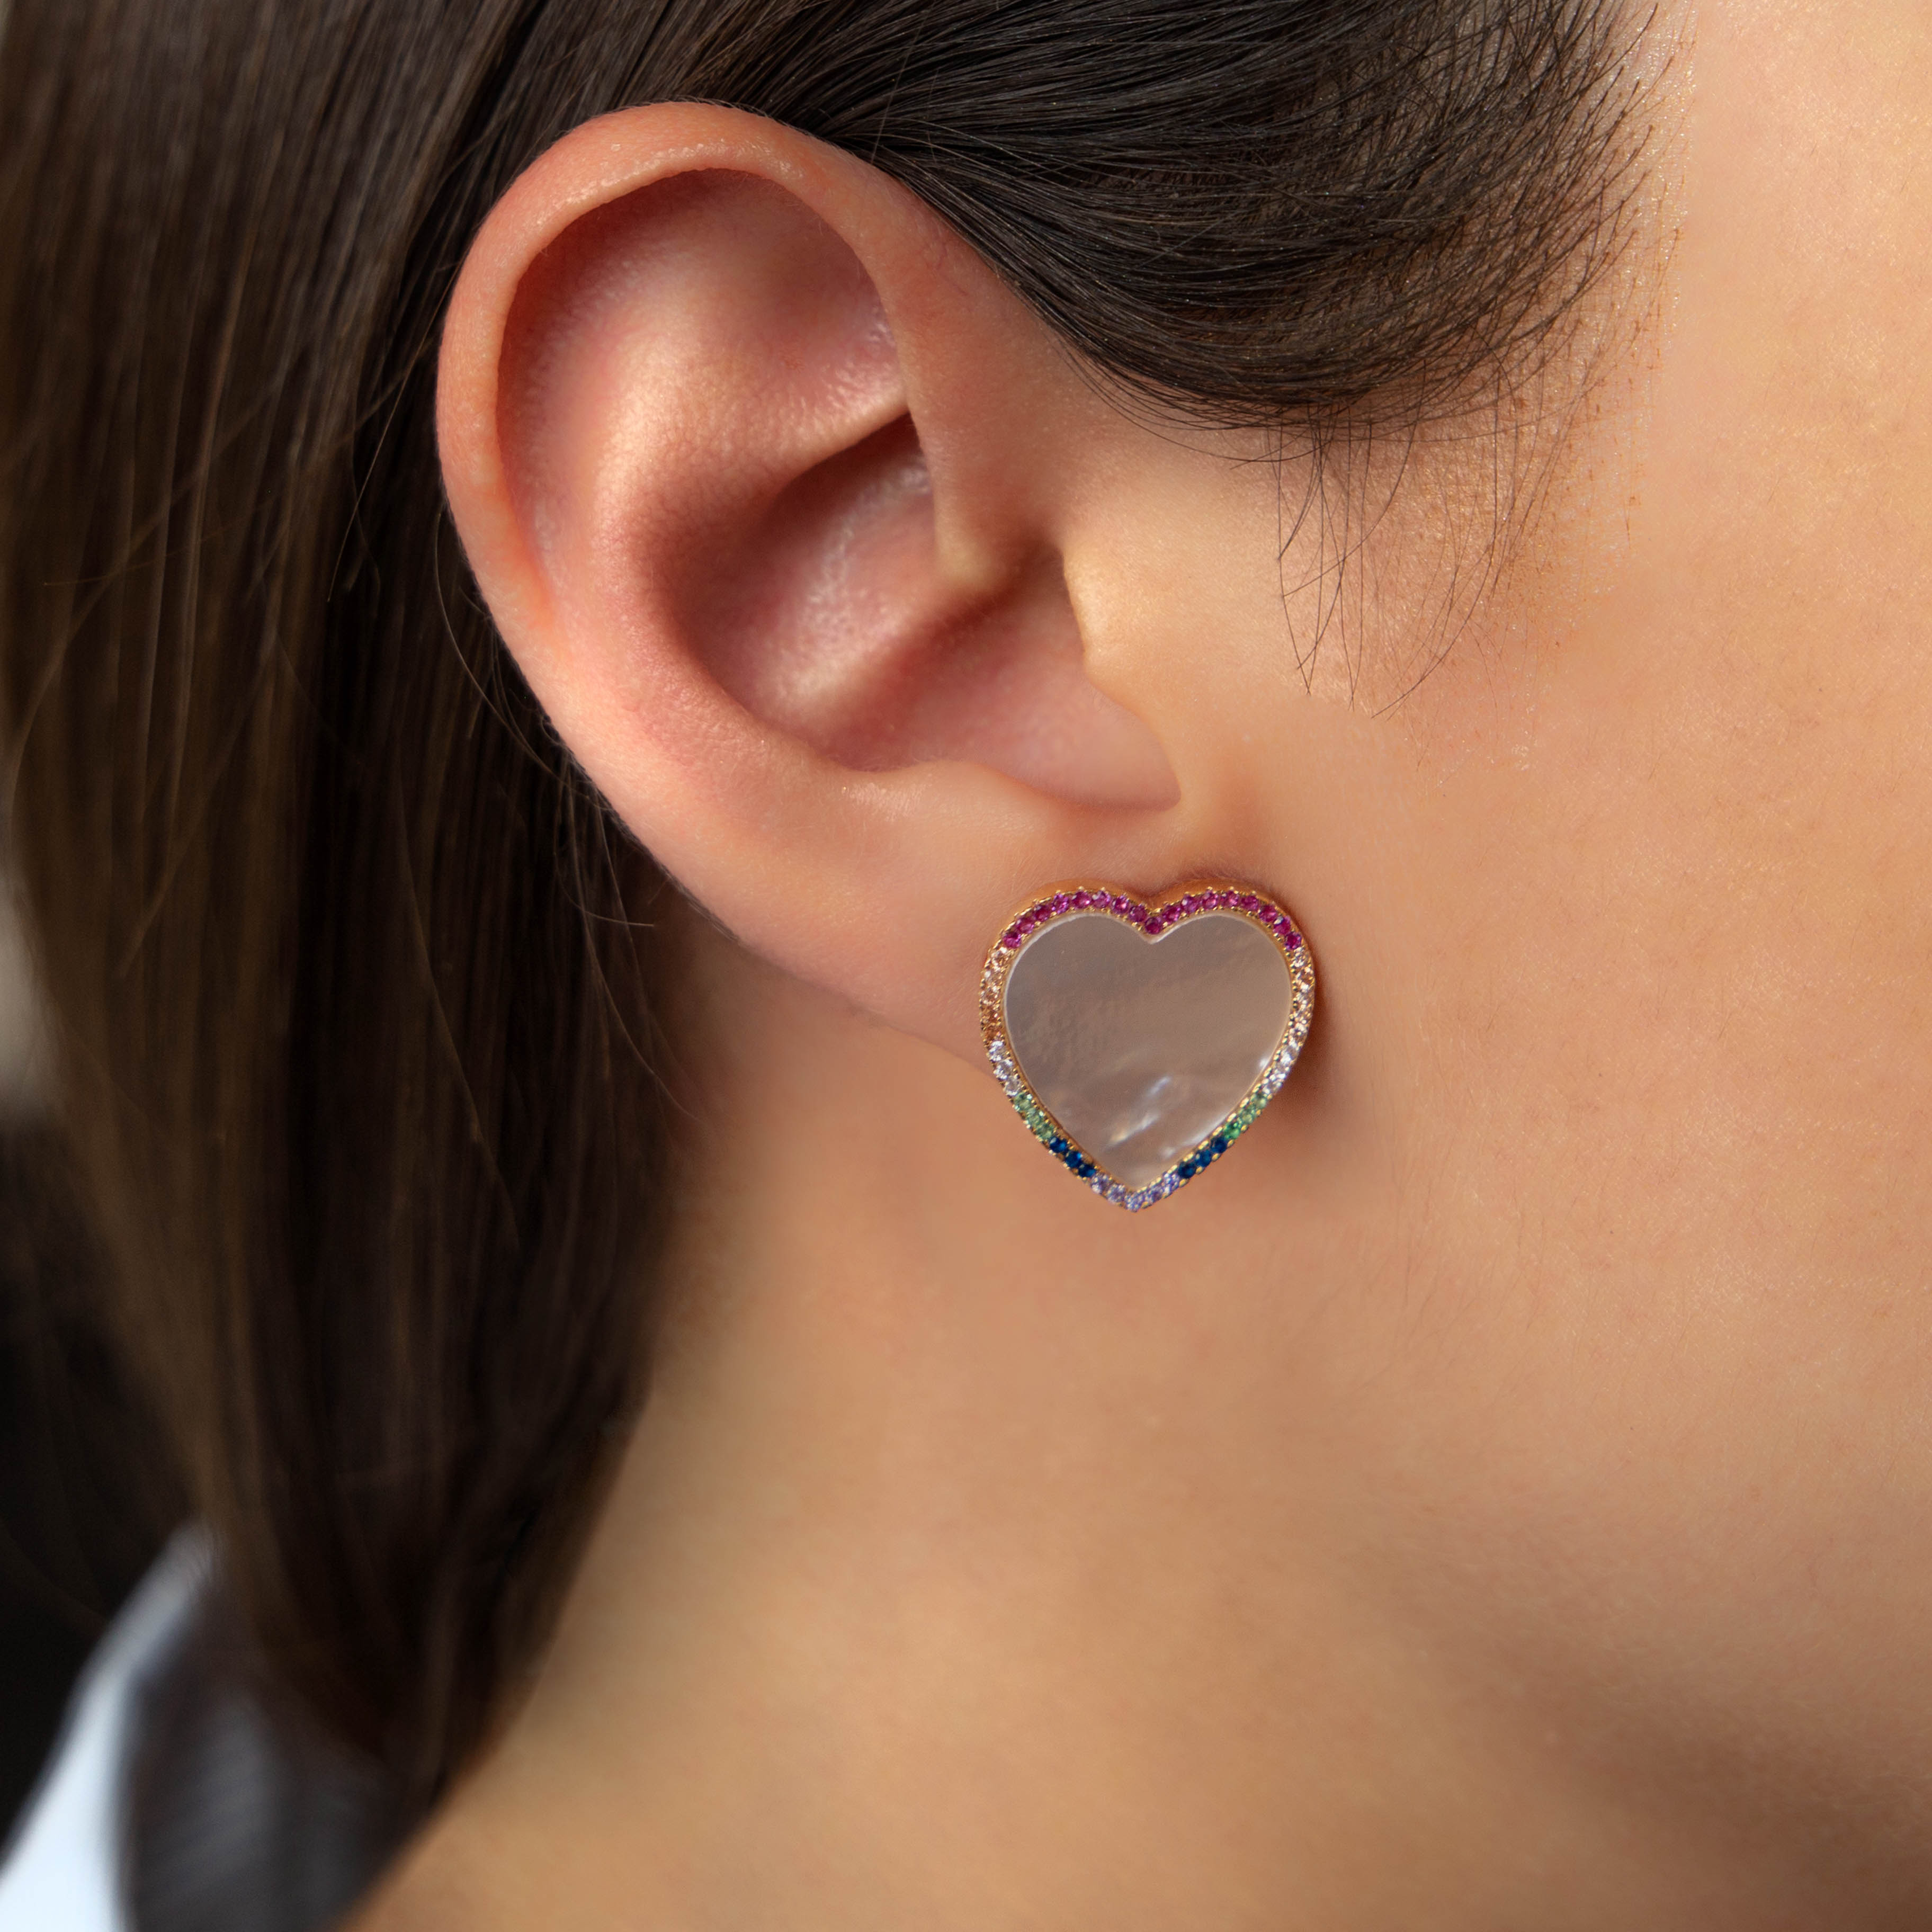 HEART EARRINGS WITH MOTHER OF PEARL AND MULTICOLOR CRYSTALS SET IN 925 SILVER GOLD PLATED